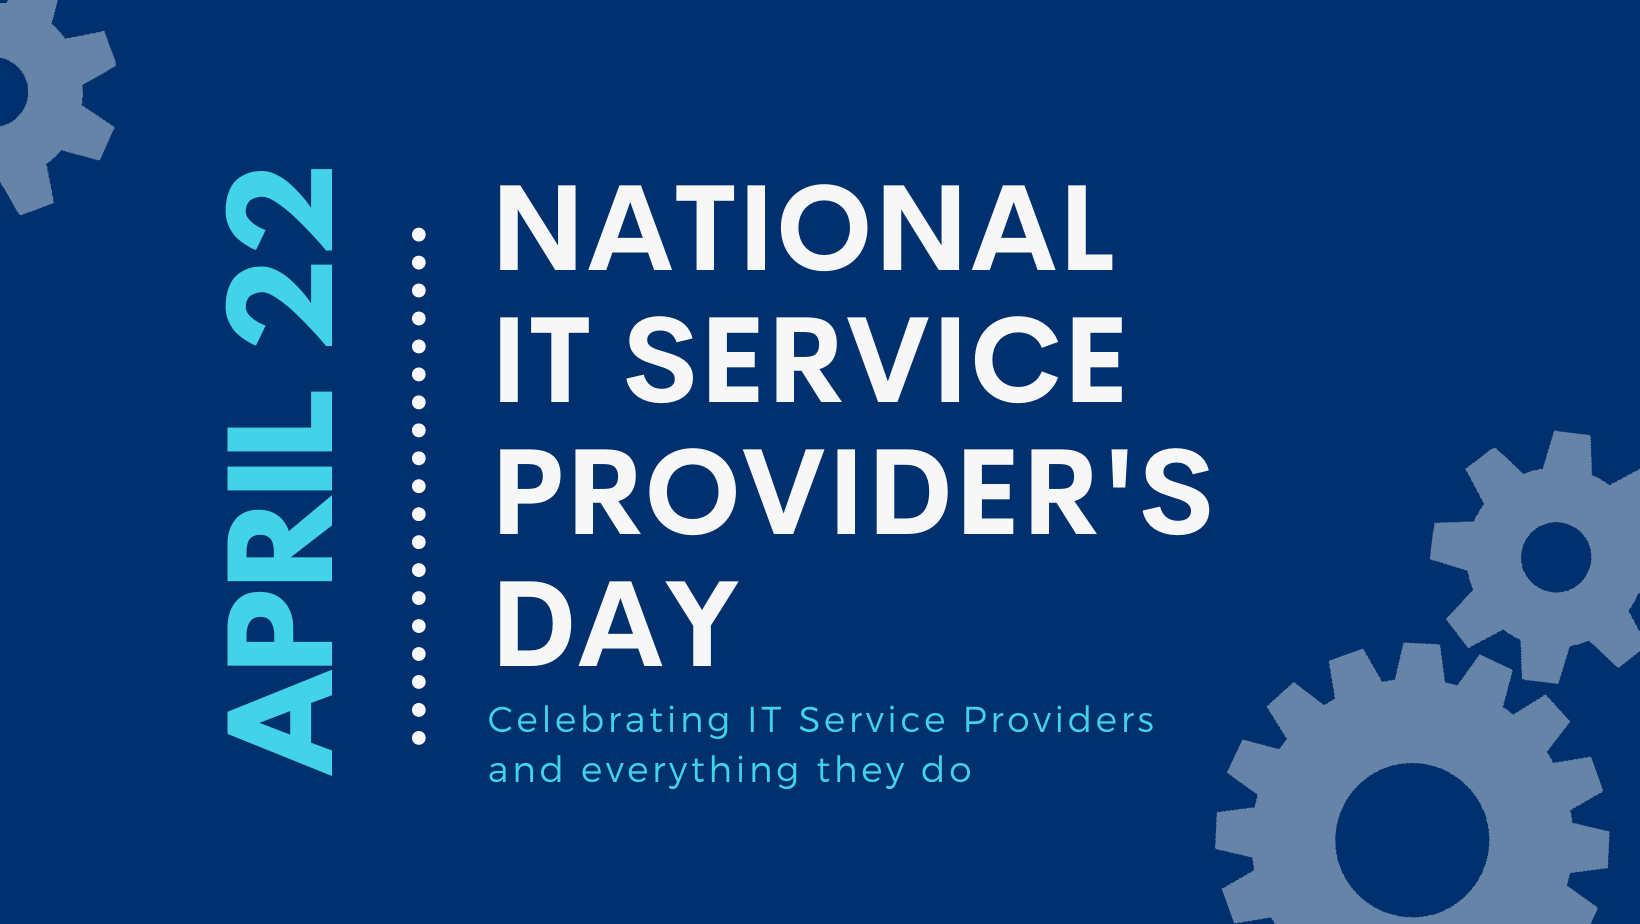 National IT Service Provider's Day